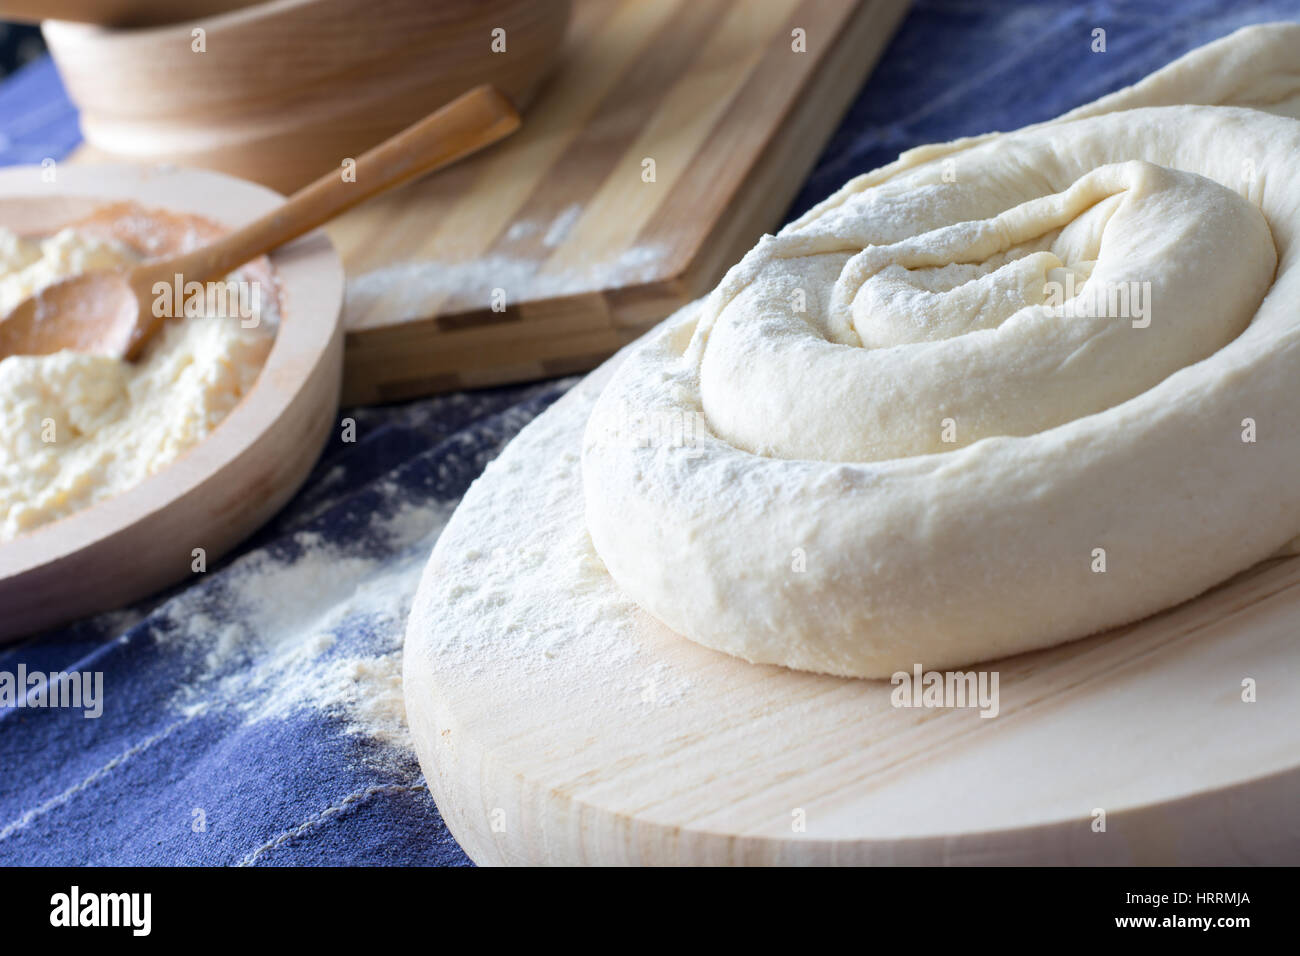 Making of Homemade cheese Pie or other kind of pastry appetizer or sweets on a wooden plate. Cheese pie ready for baking Stock Photo